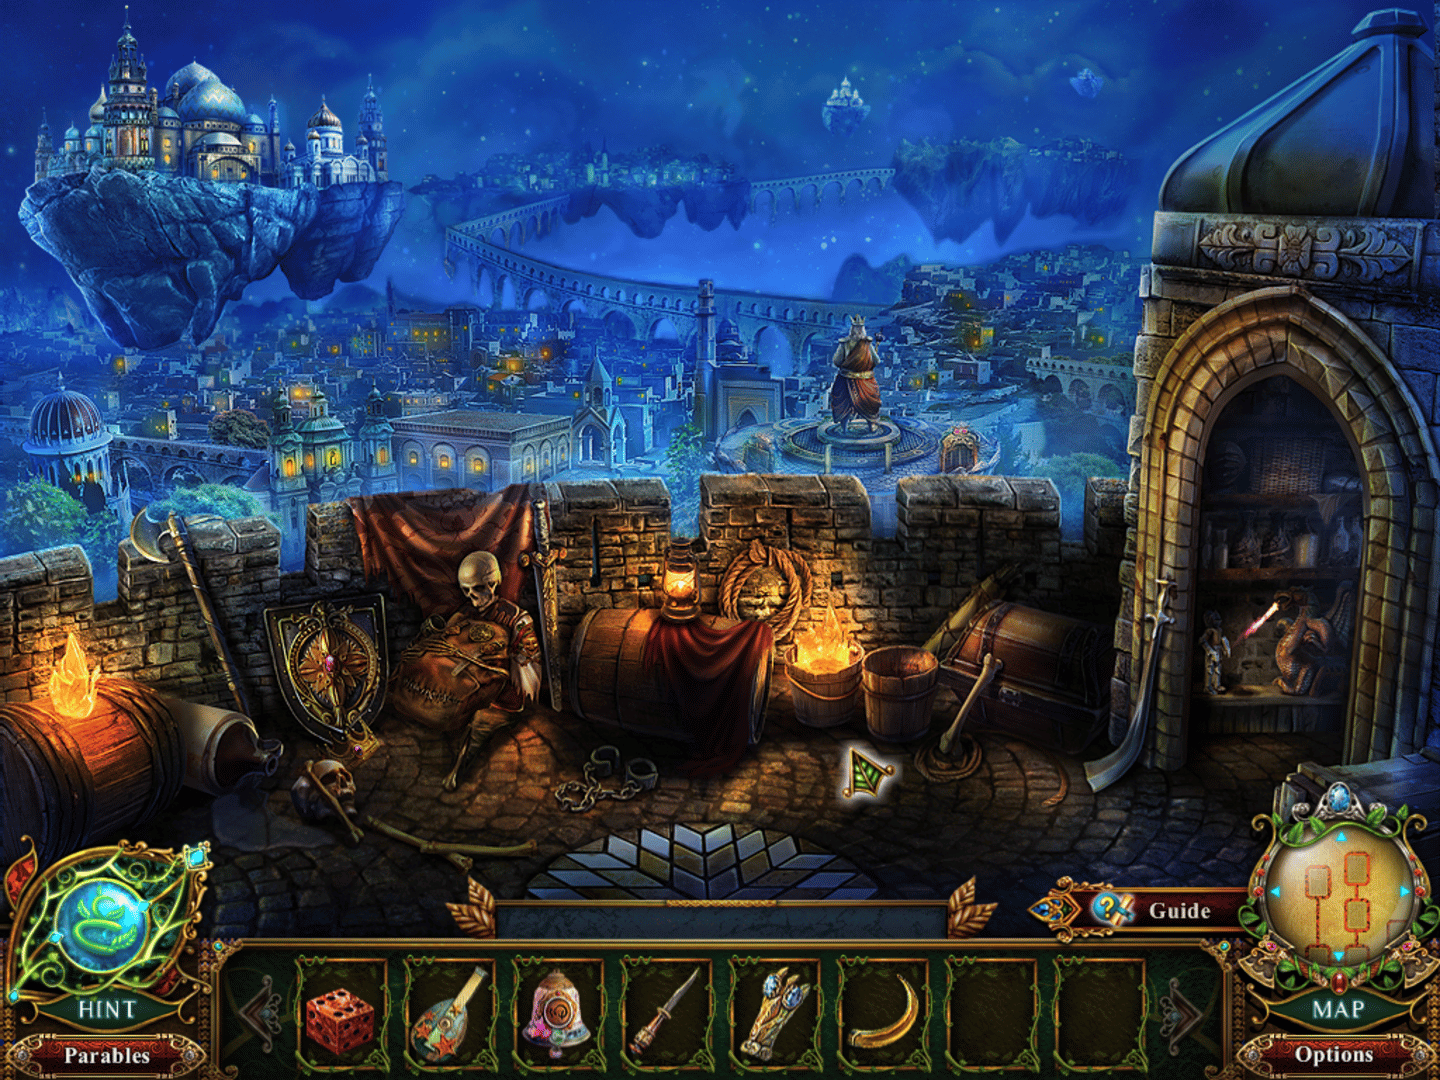 Dark Parables: Jack and the Sky Kingdom Collector's Edition screenshot